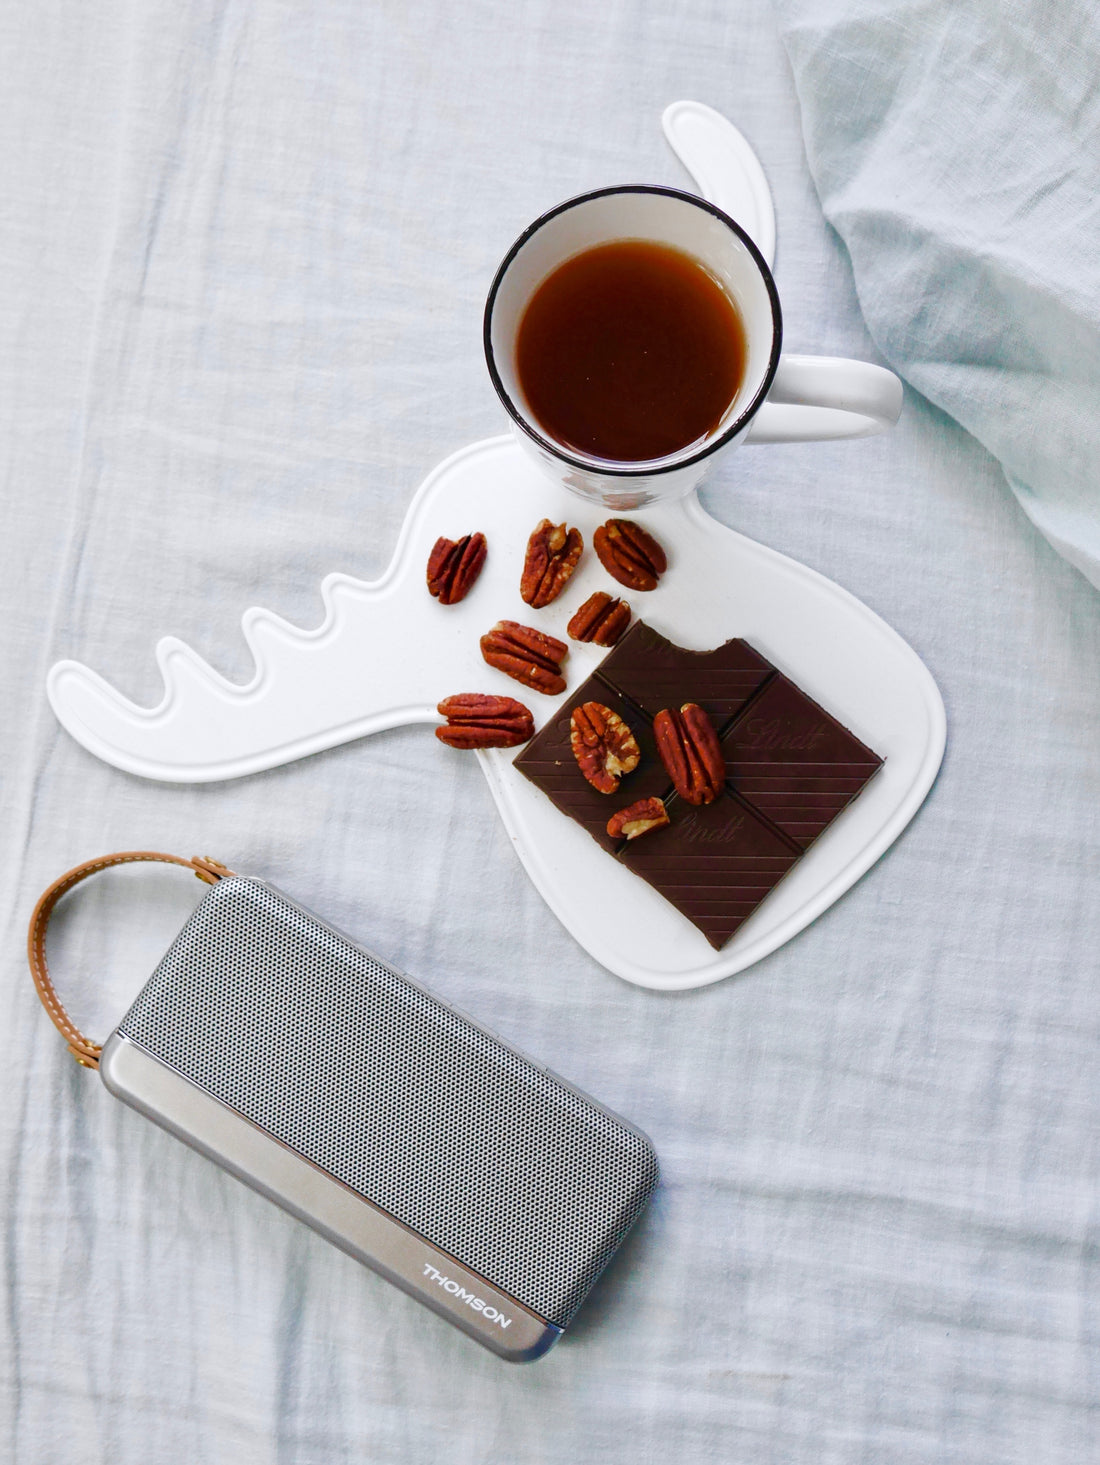 The Best Chocolate Pairings for Tea